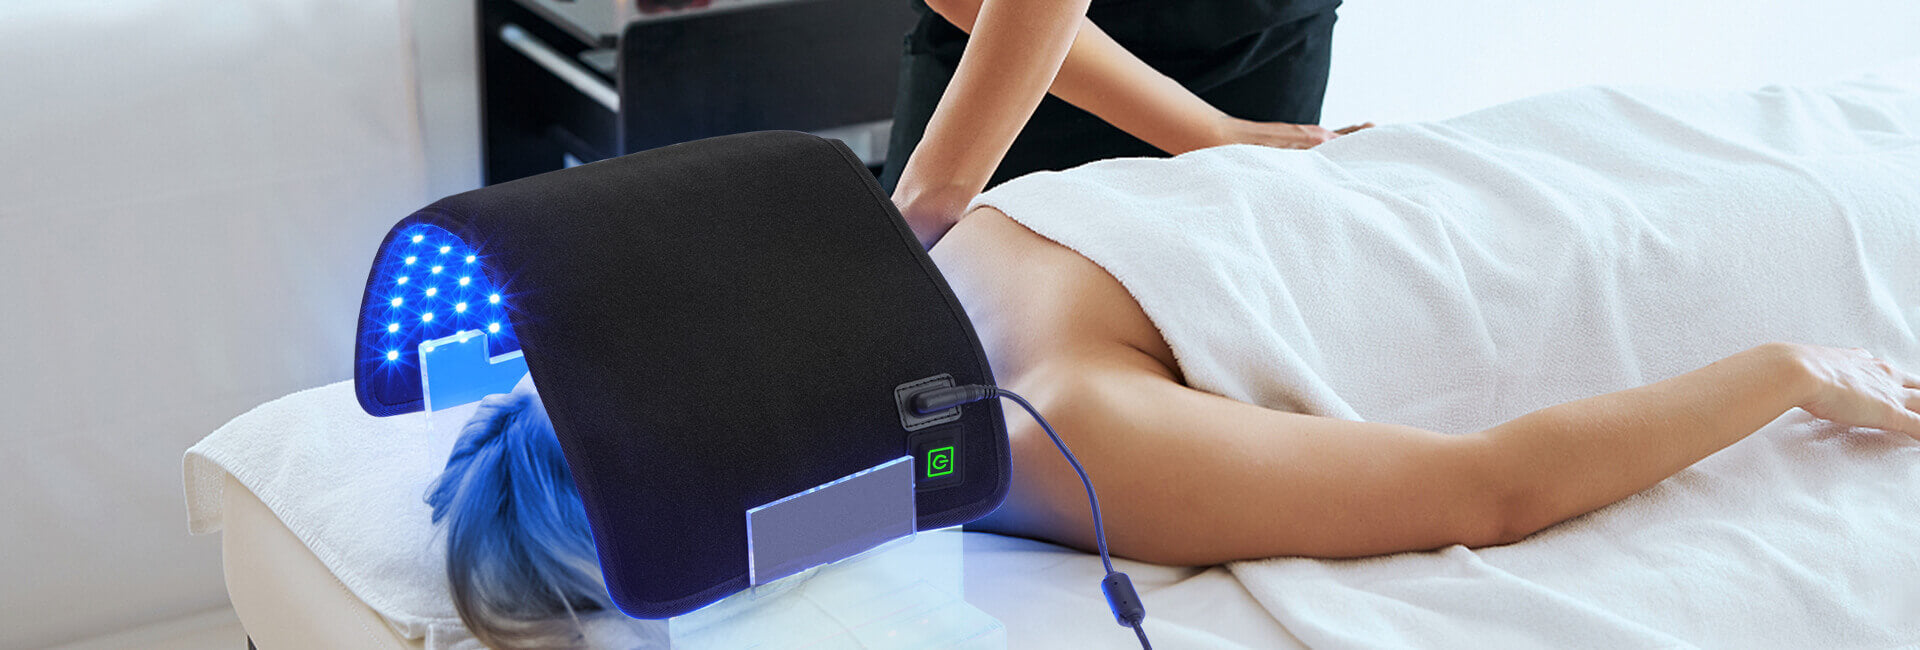 blue light therapy for acne facial beauty